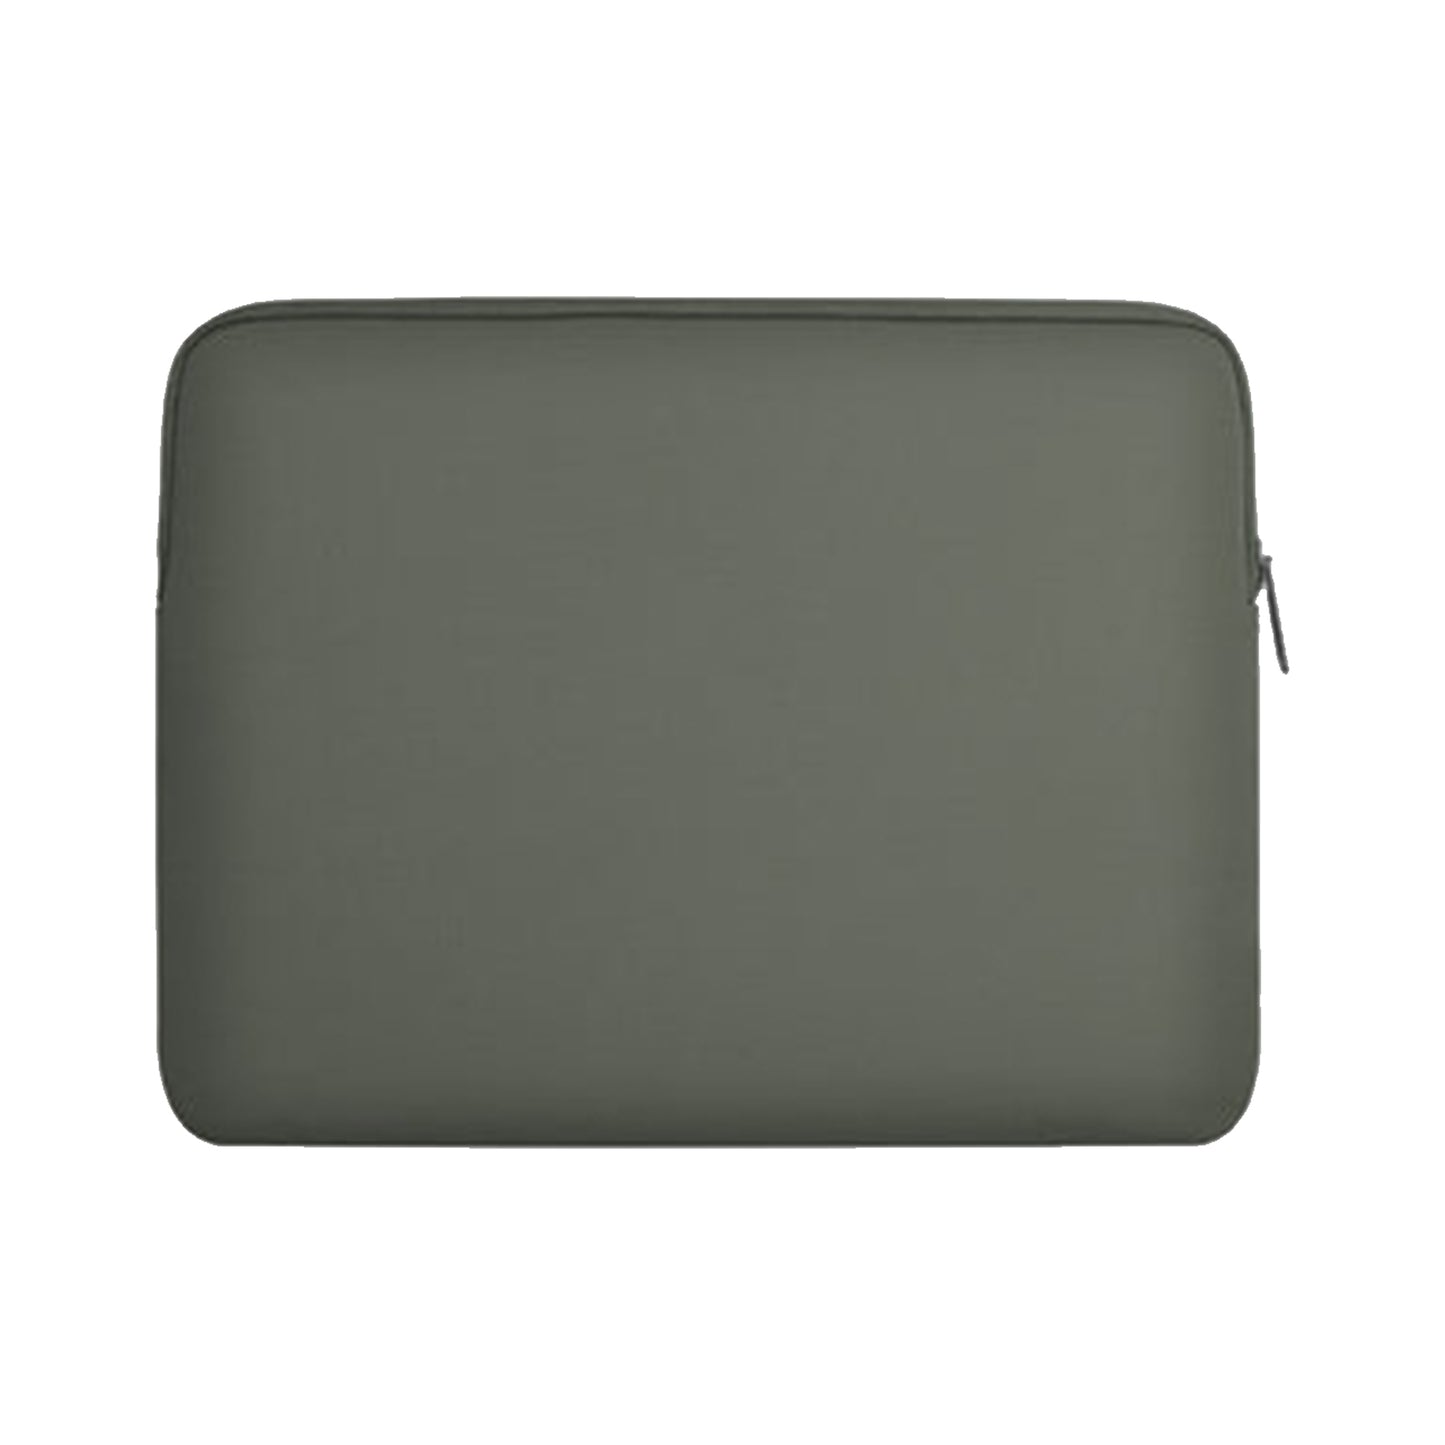 UNIQ Cyprus Laptop and Tablet Sleeve - Water Resistant Neoprene Up to 14" - 14 inch - Pewter Green ( Barcode: 8886463680766 )